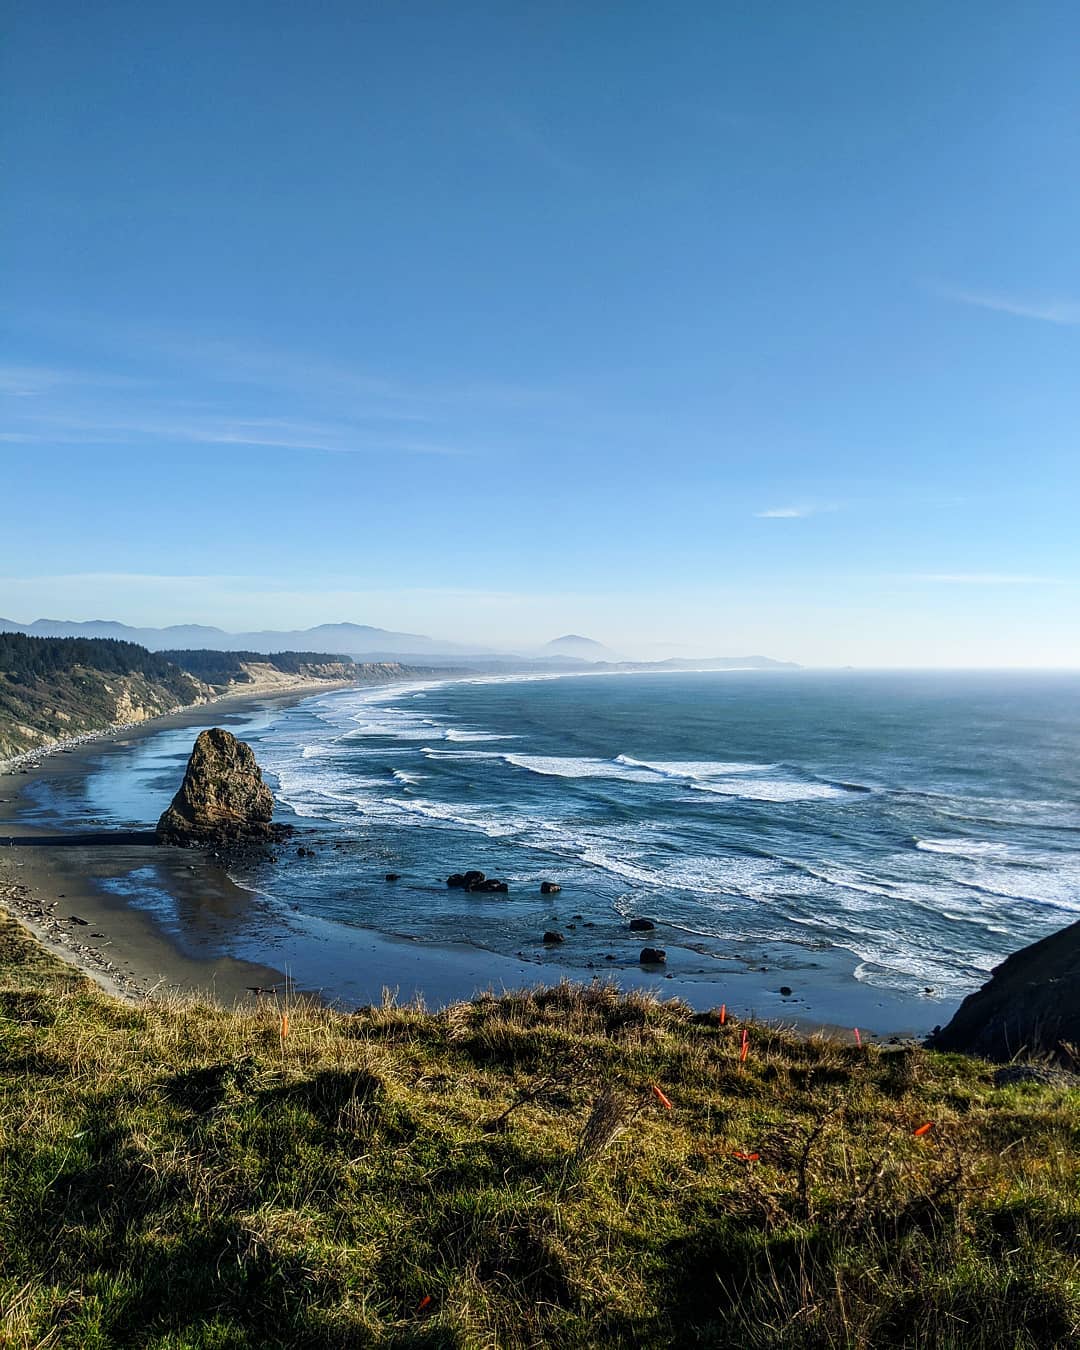 Beach View at Cape Blanco State Park at Port Orford, OR. Photo by Instagram user @retiringfromnormal